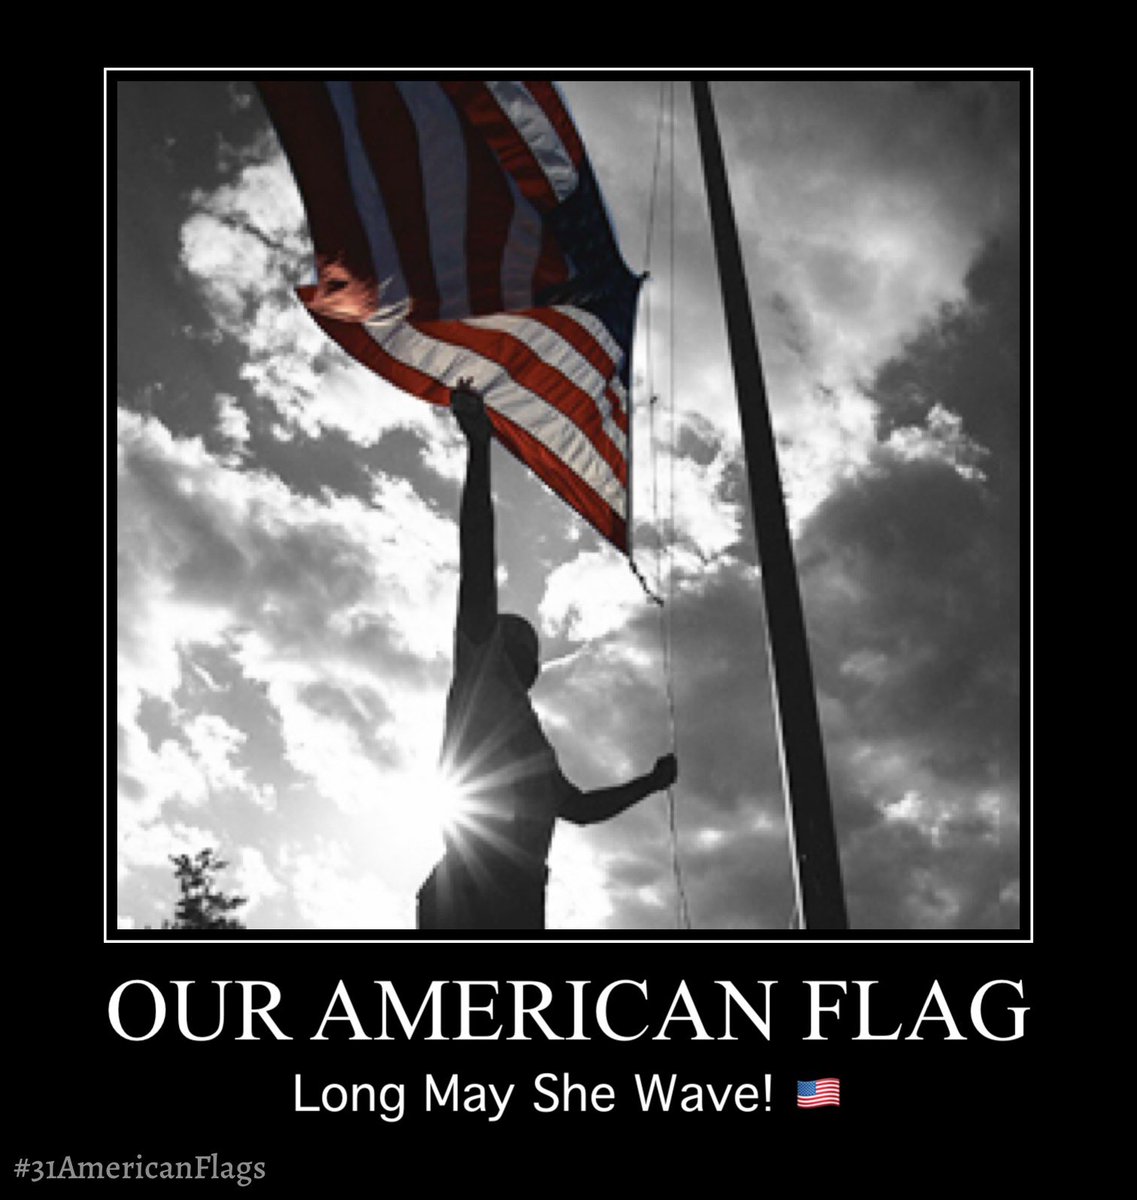 Patriotism dwells in the hearts & minds of those tall & small.  
#31americanflags #kenthrives #ProudAmerican #patriotism